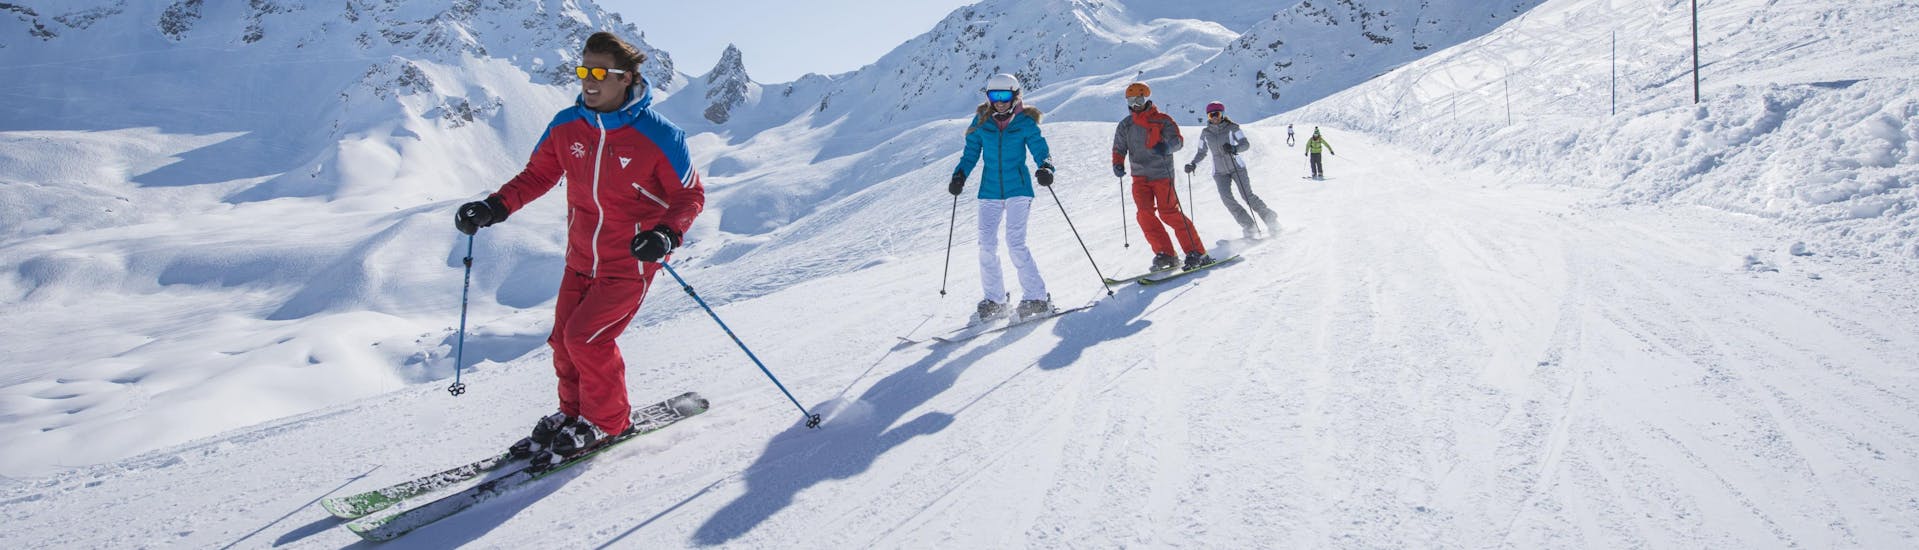 A group of skiers enjoy a day out in the slopes of the Courchevel 1550 ski resort where ski schools offers their ski lessons.